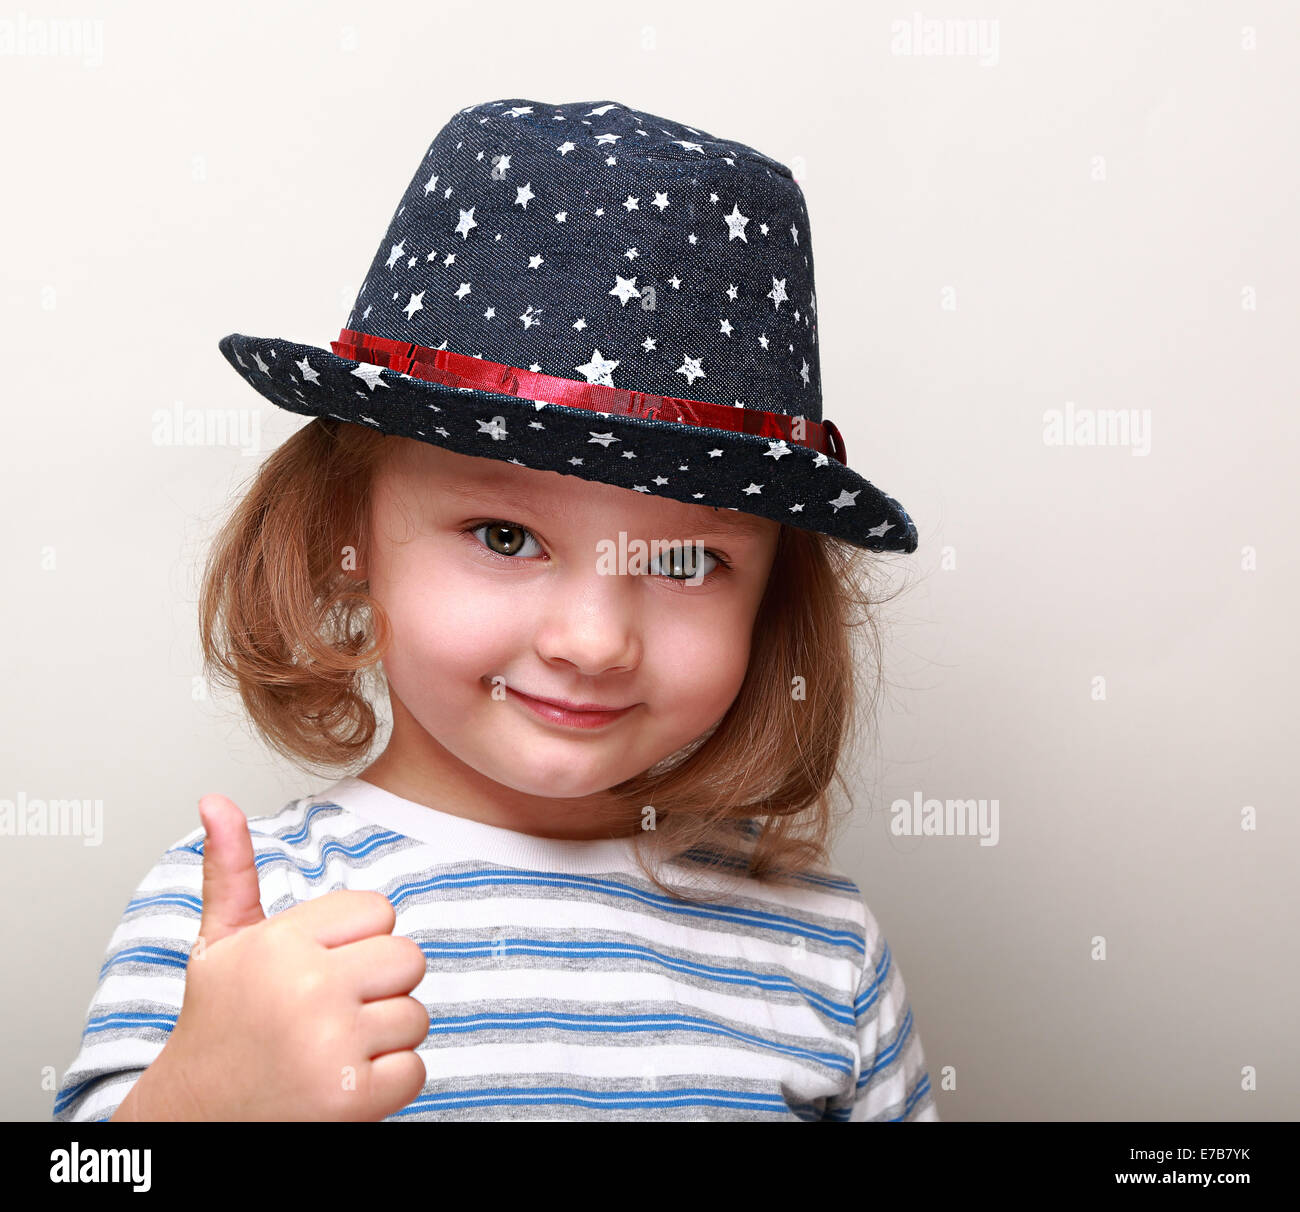 Cute kid girl in blue hat showing thumb up sign Stock Photo